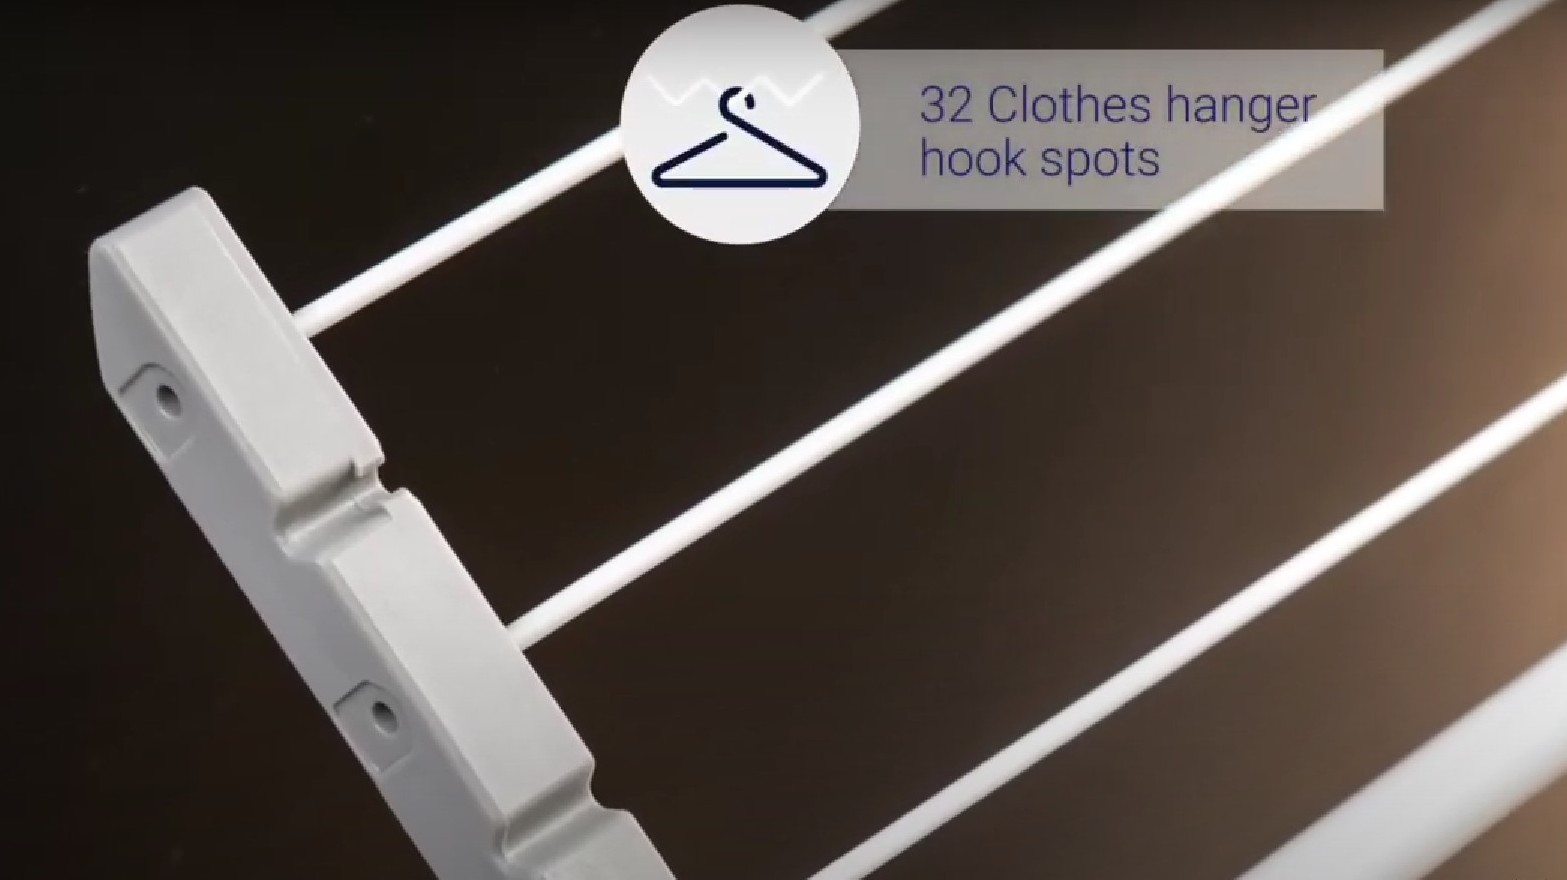 Hills Four Wing Expanding Clothes Airer Review Dedicated Clothes Hang Hook Slots